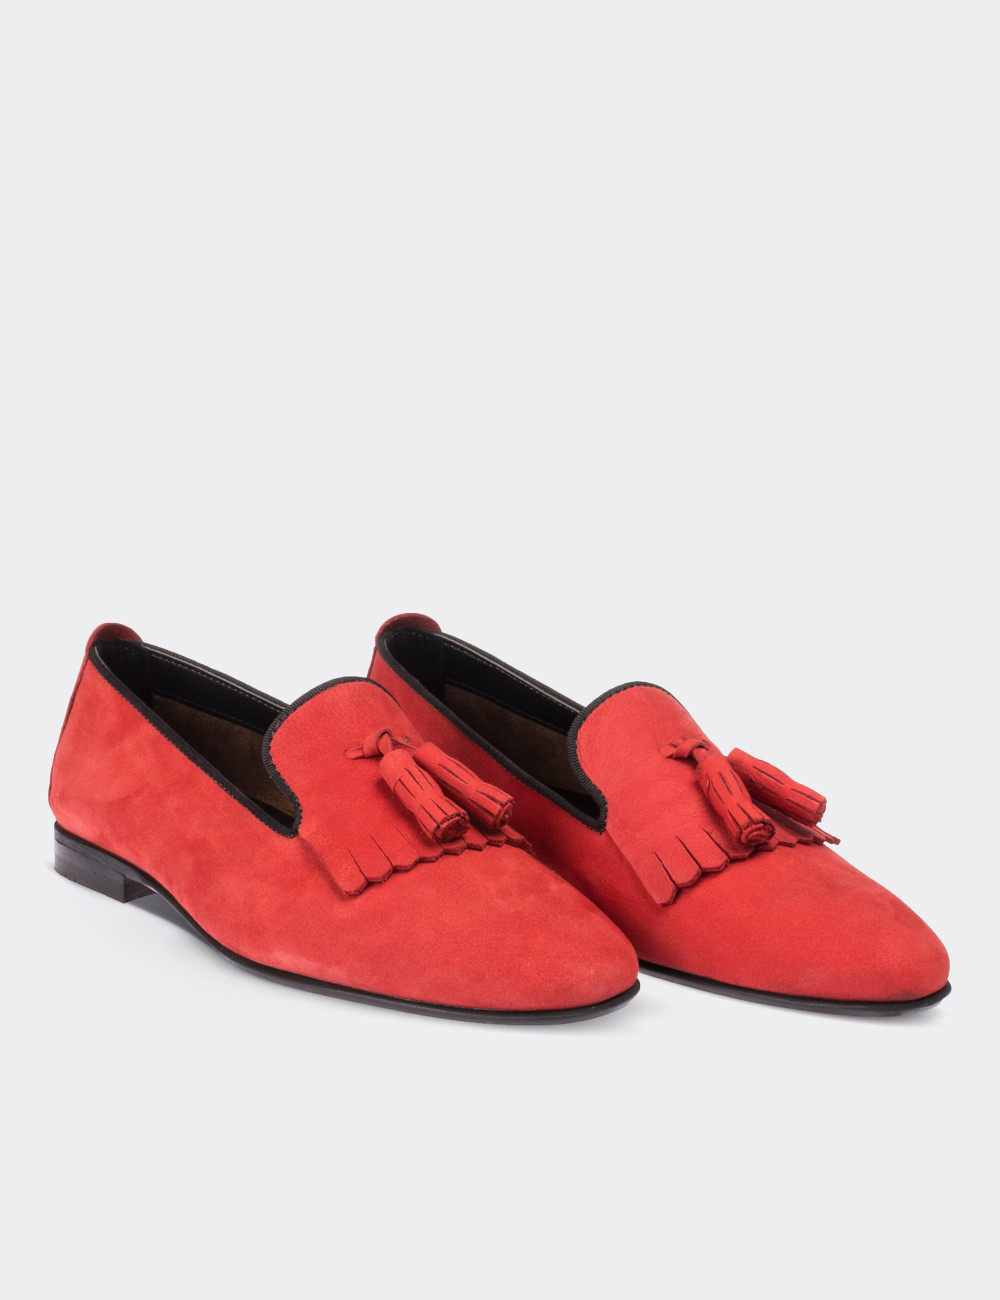 Red Suede Leather Loafers - 01612ZKRMM01